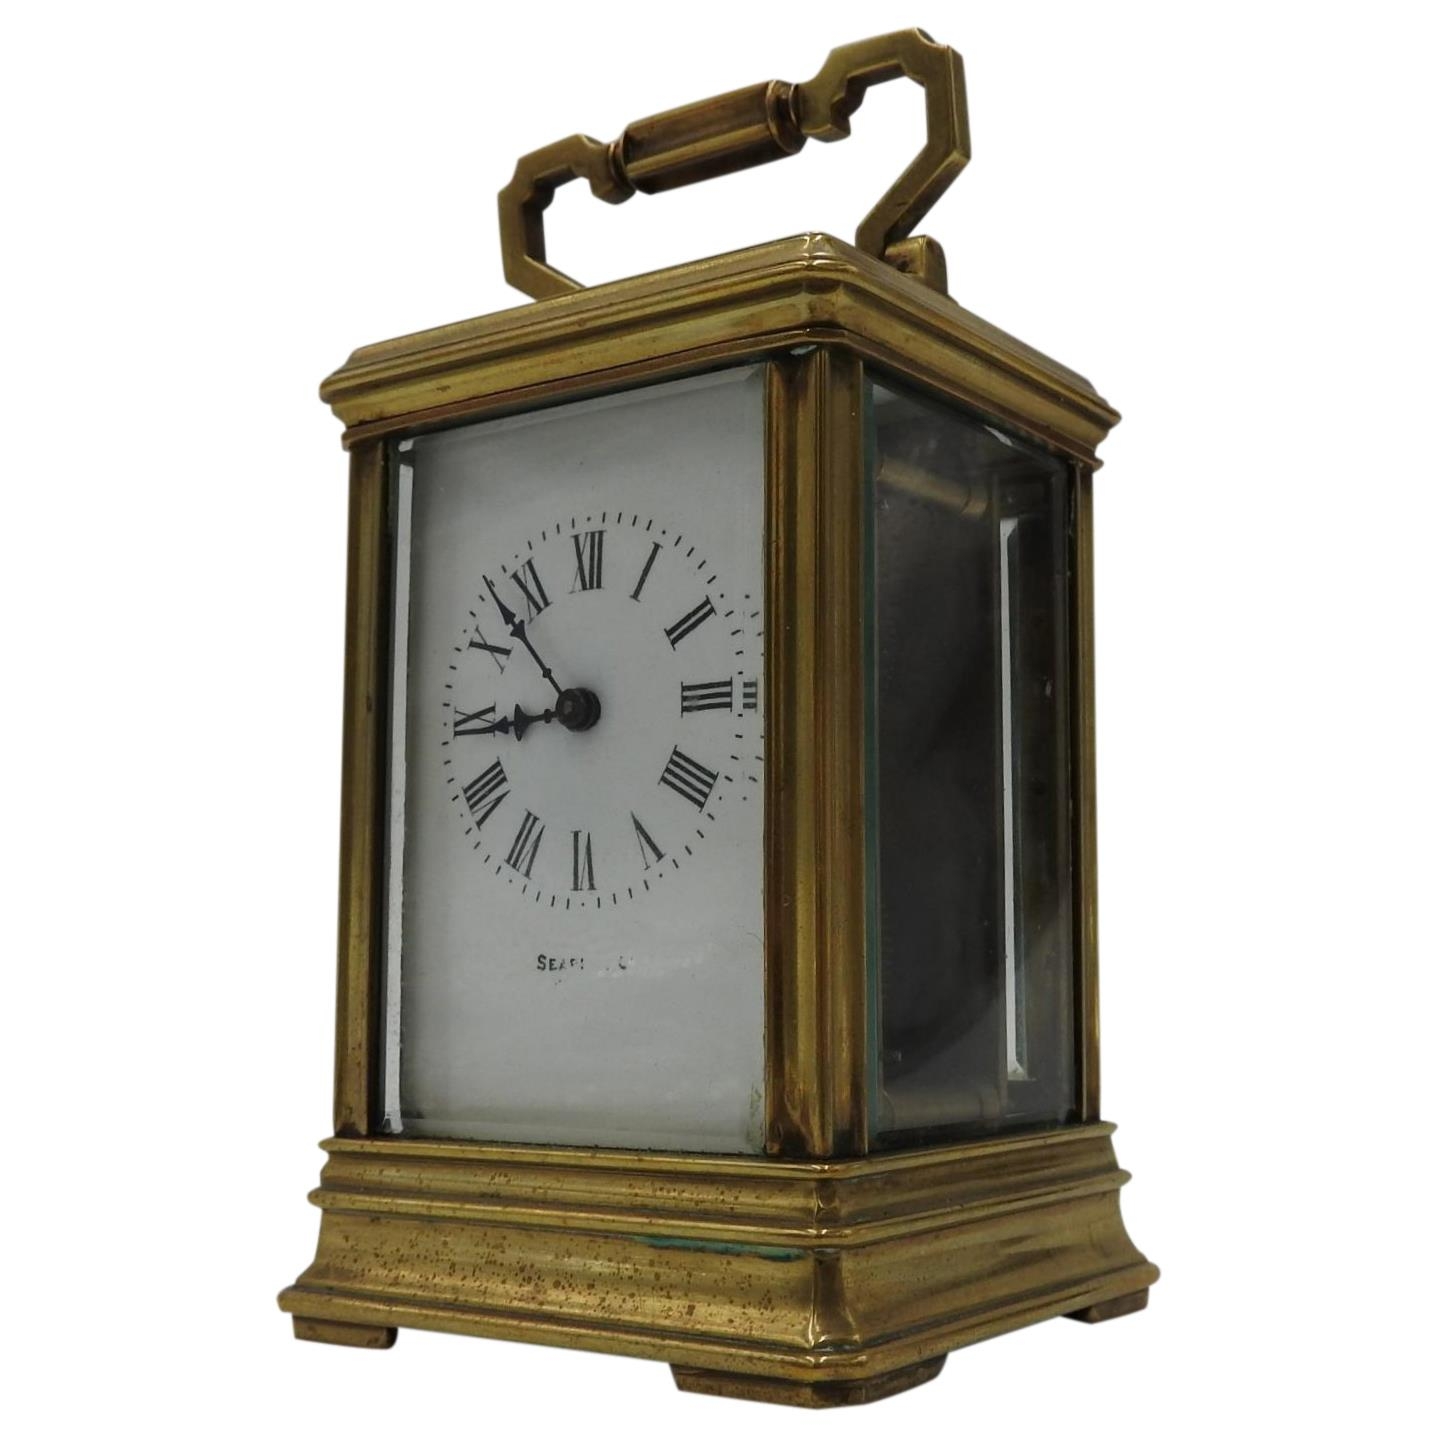 A FRENCH BRASS CASED CARRIAGE CLOCK, 12 x 8 x 7.5cm